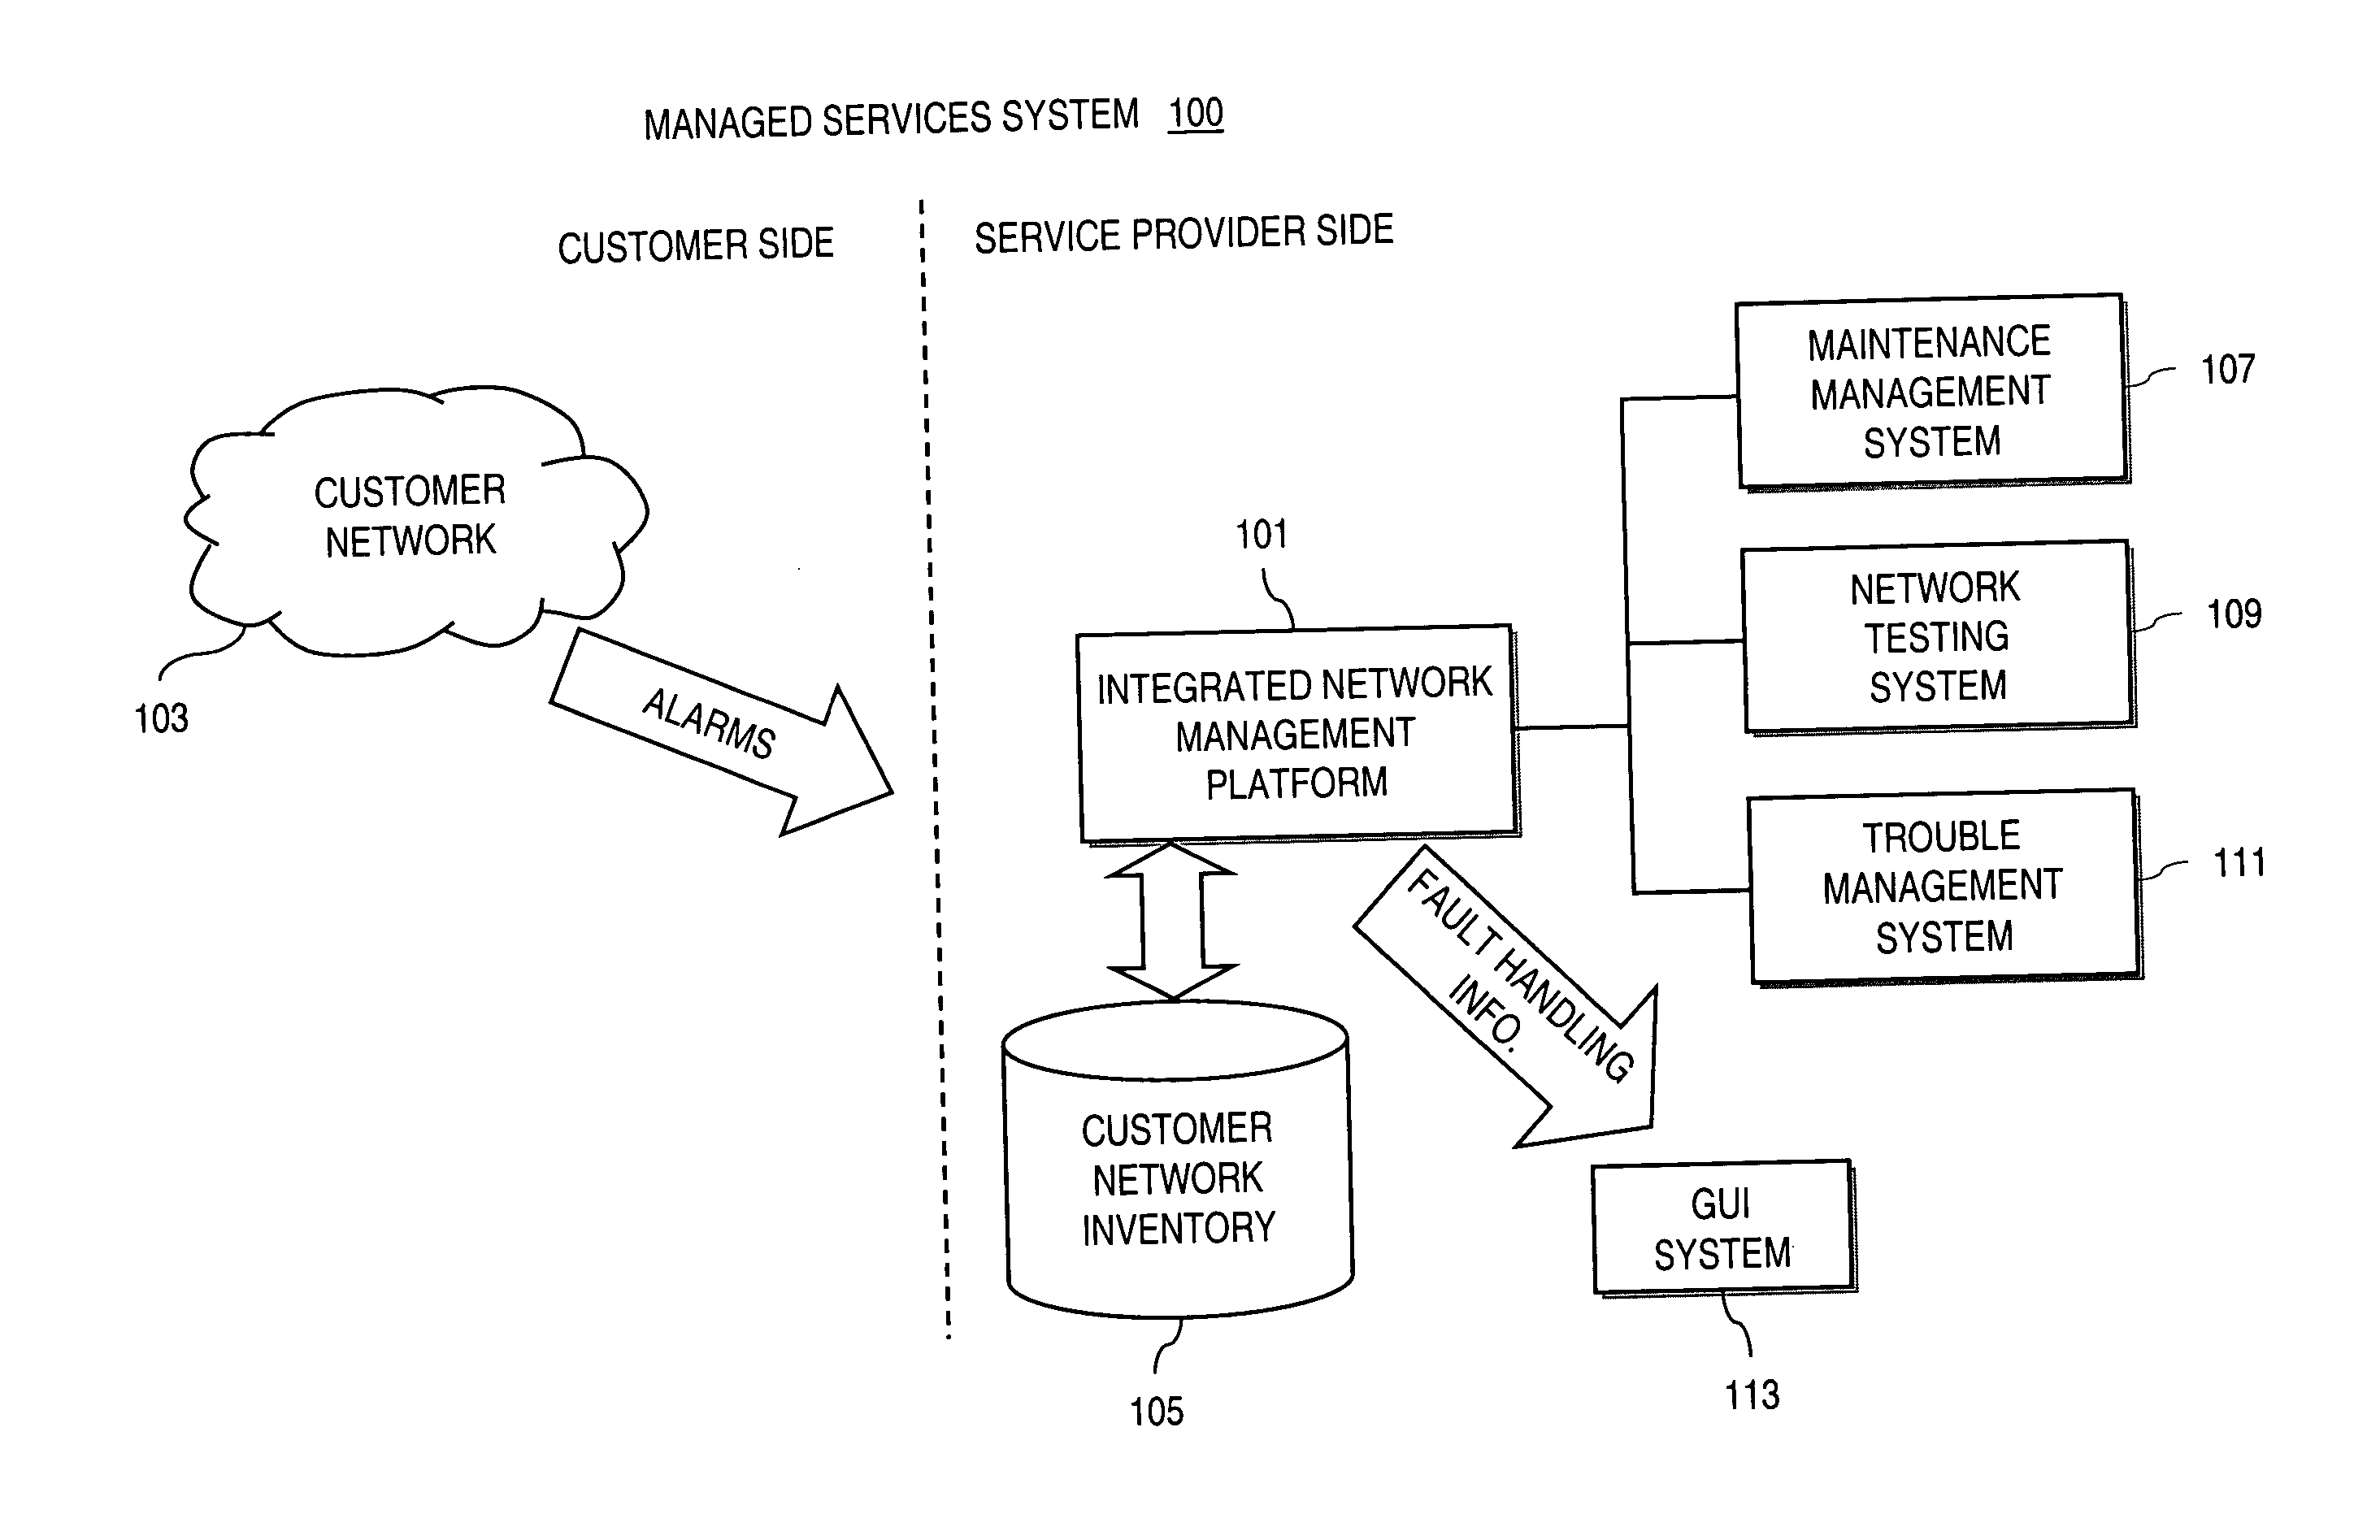 Method and system for processing fault alarms and trouble tickets in a managed network services system